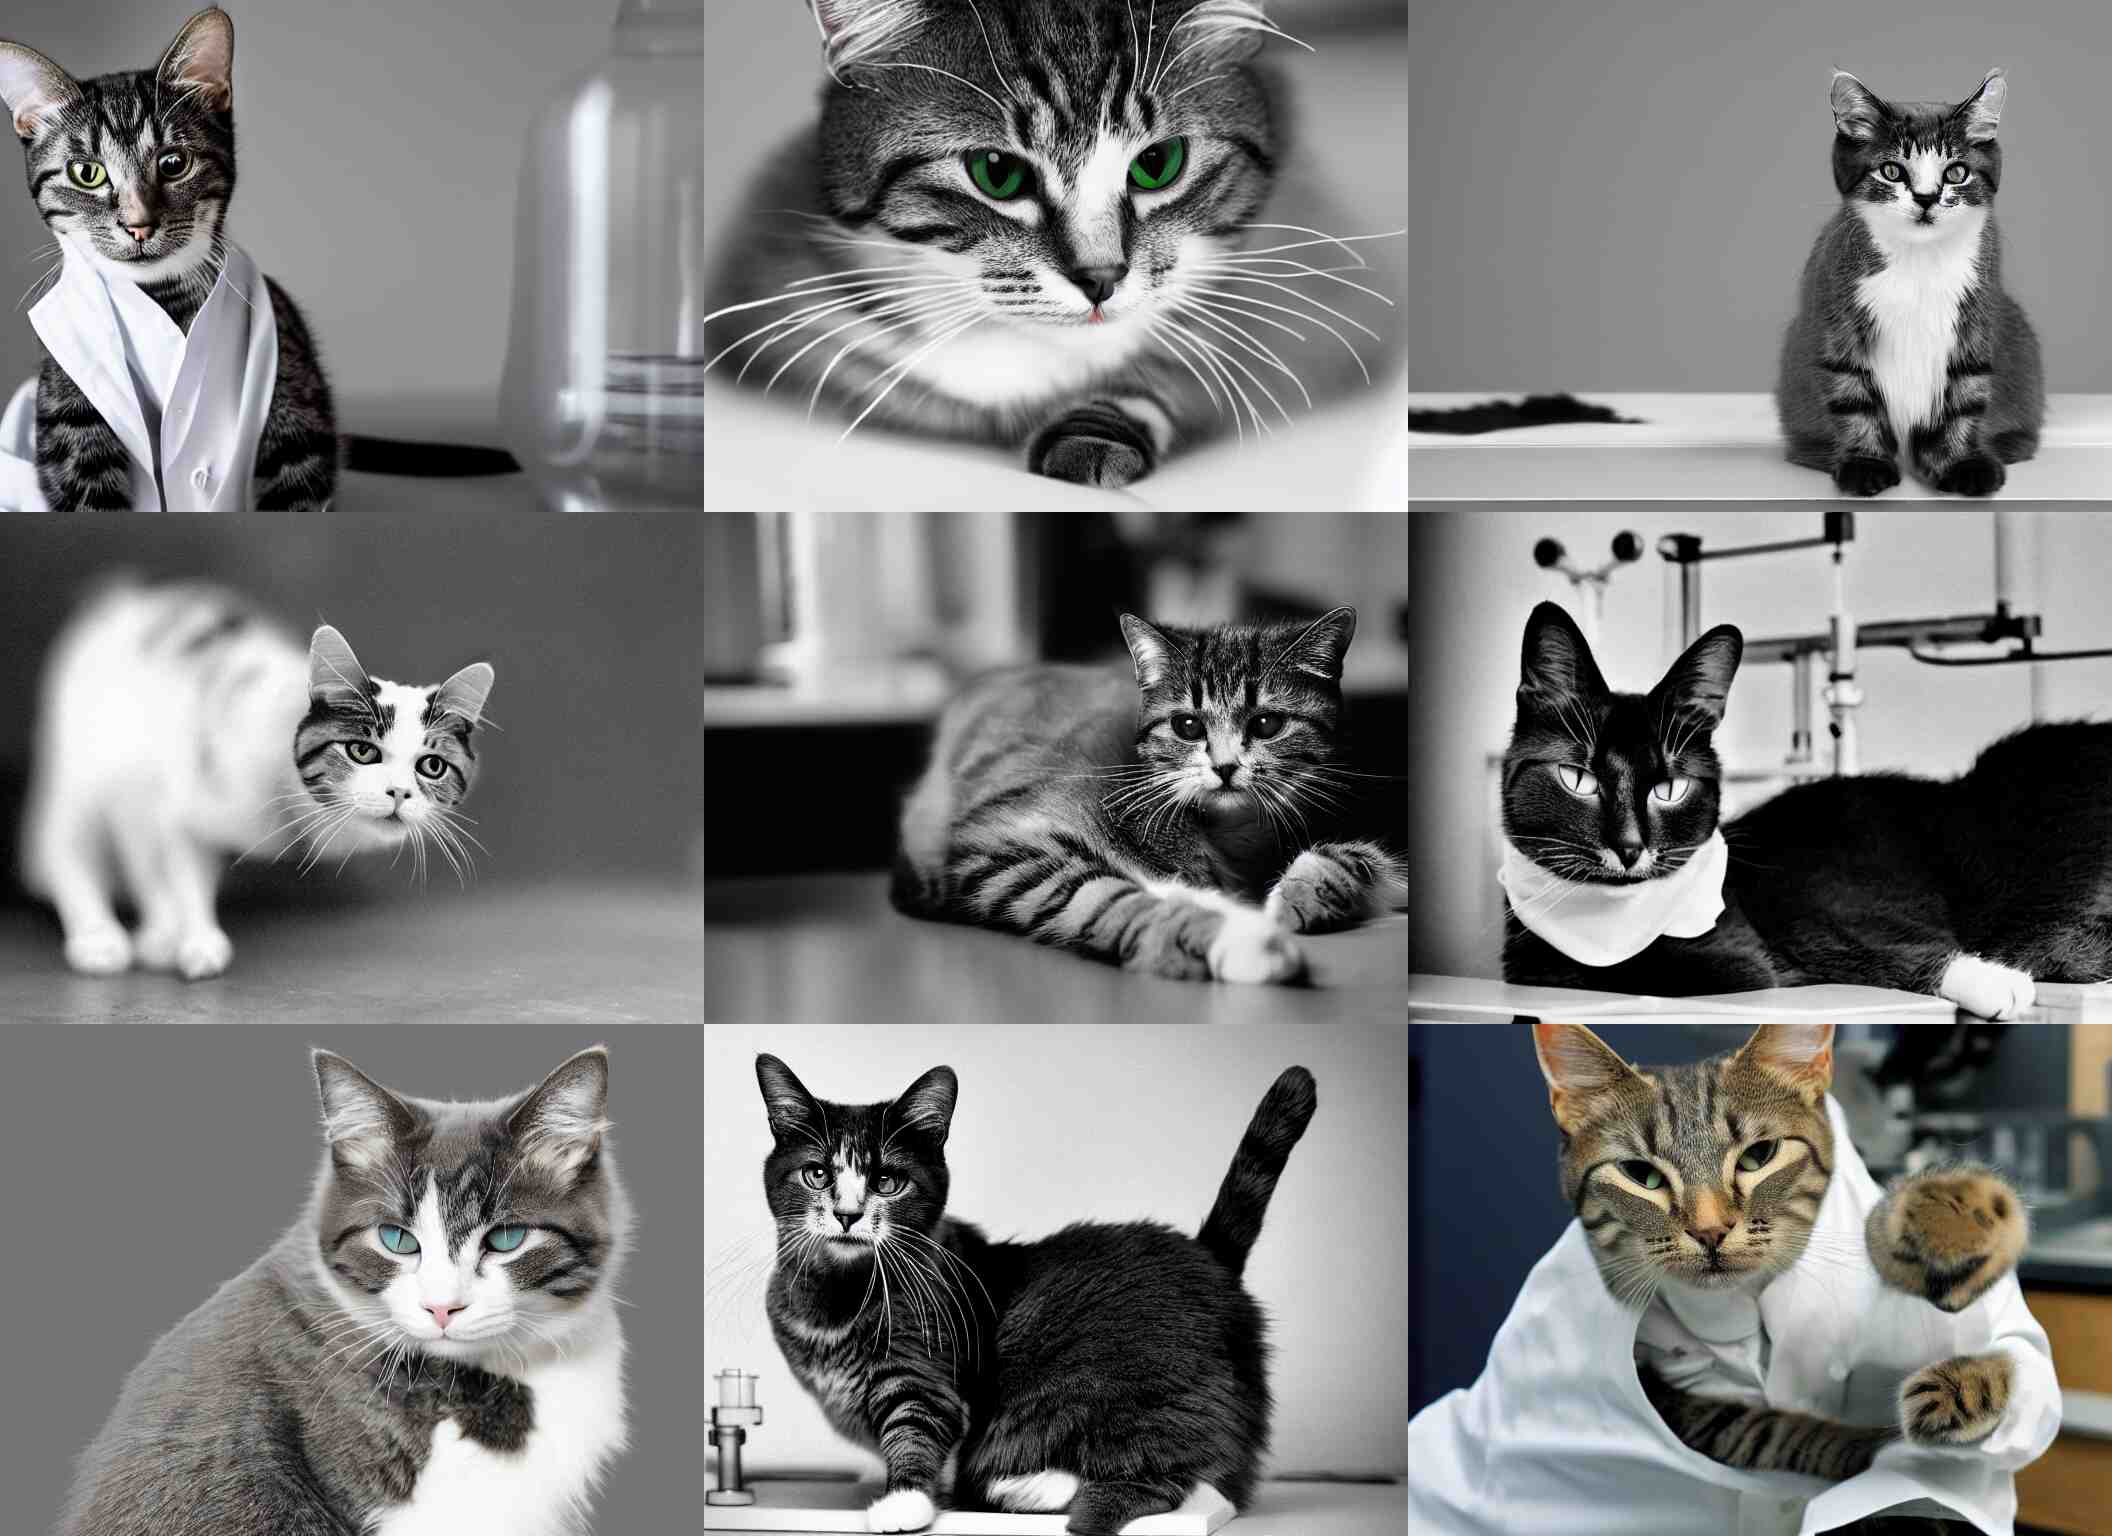 Get Accurate Cat Images Recognition Results Using This API